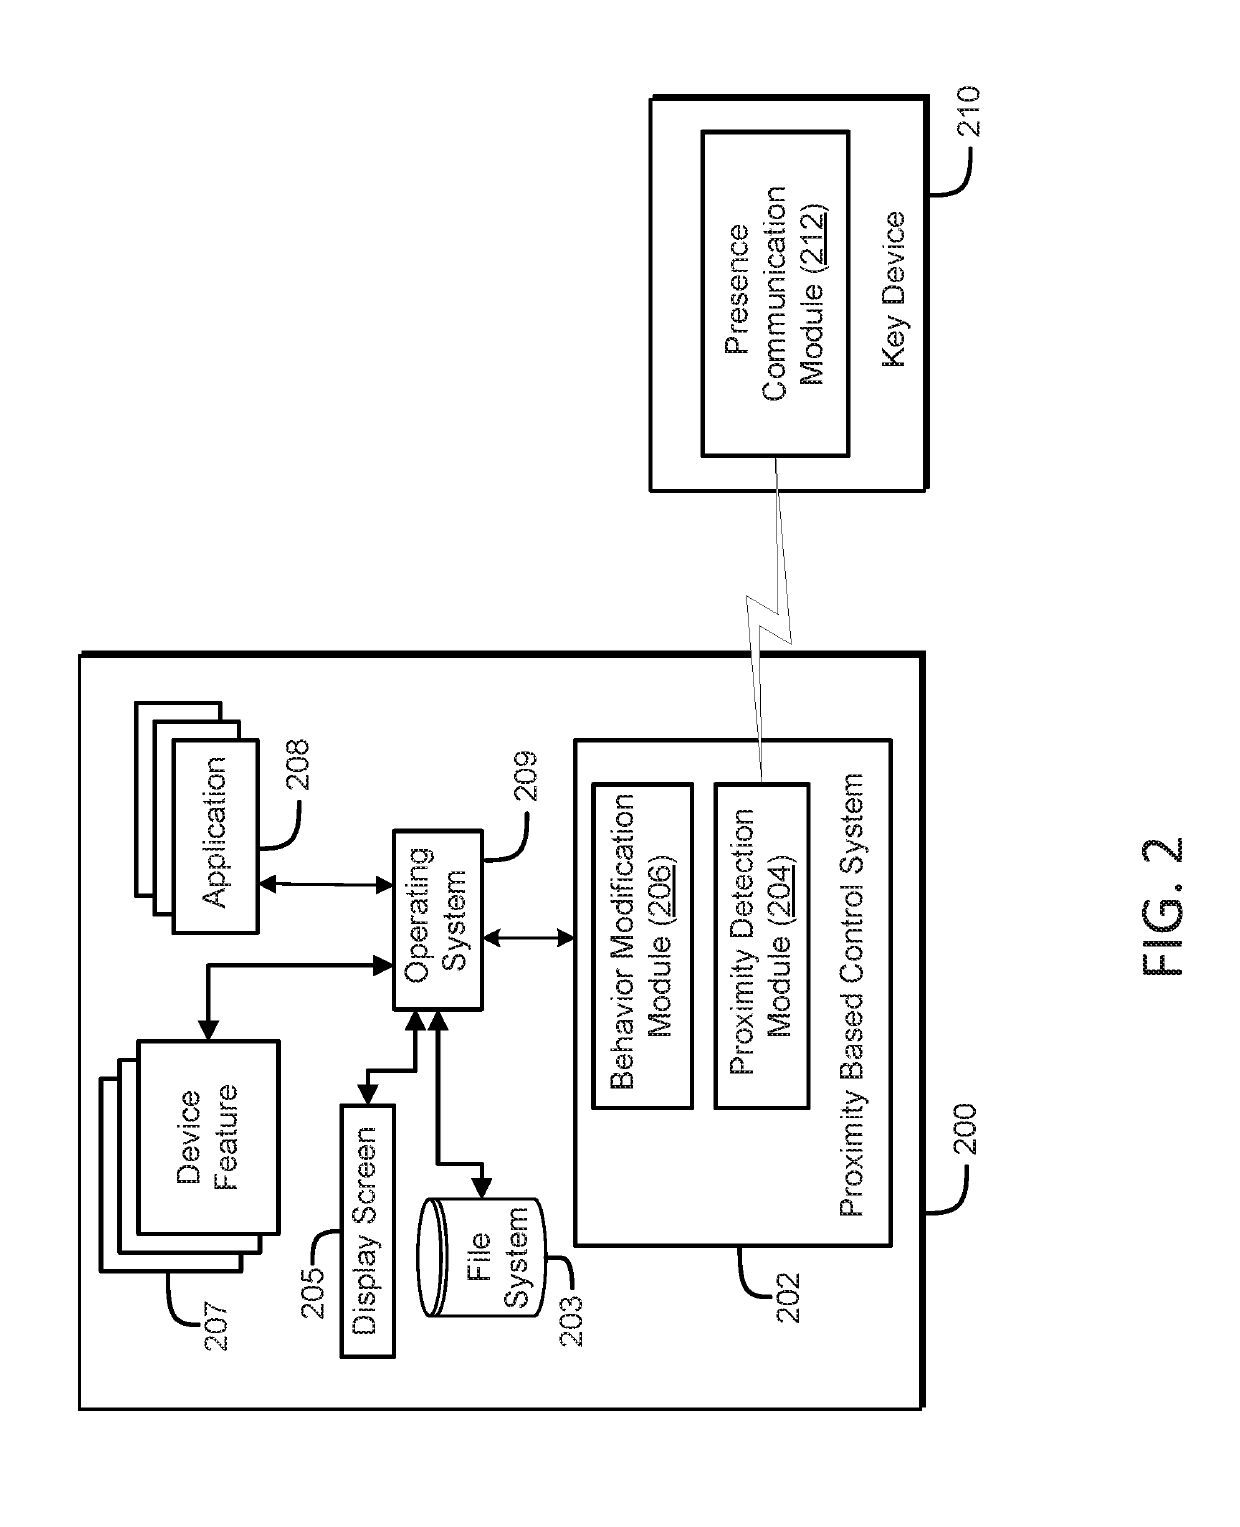 Method for changing mobile communications device functionality based upon receipt of a second code and the location of a key device